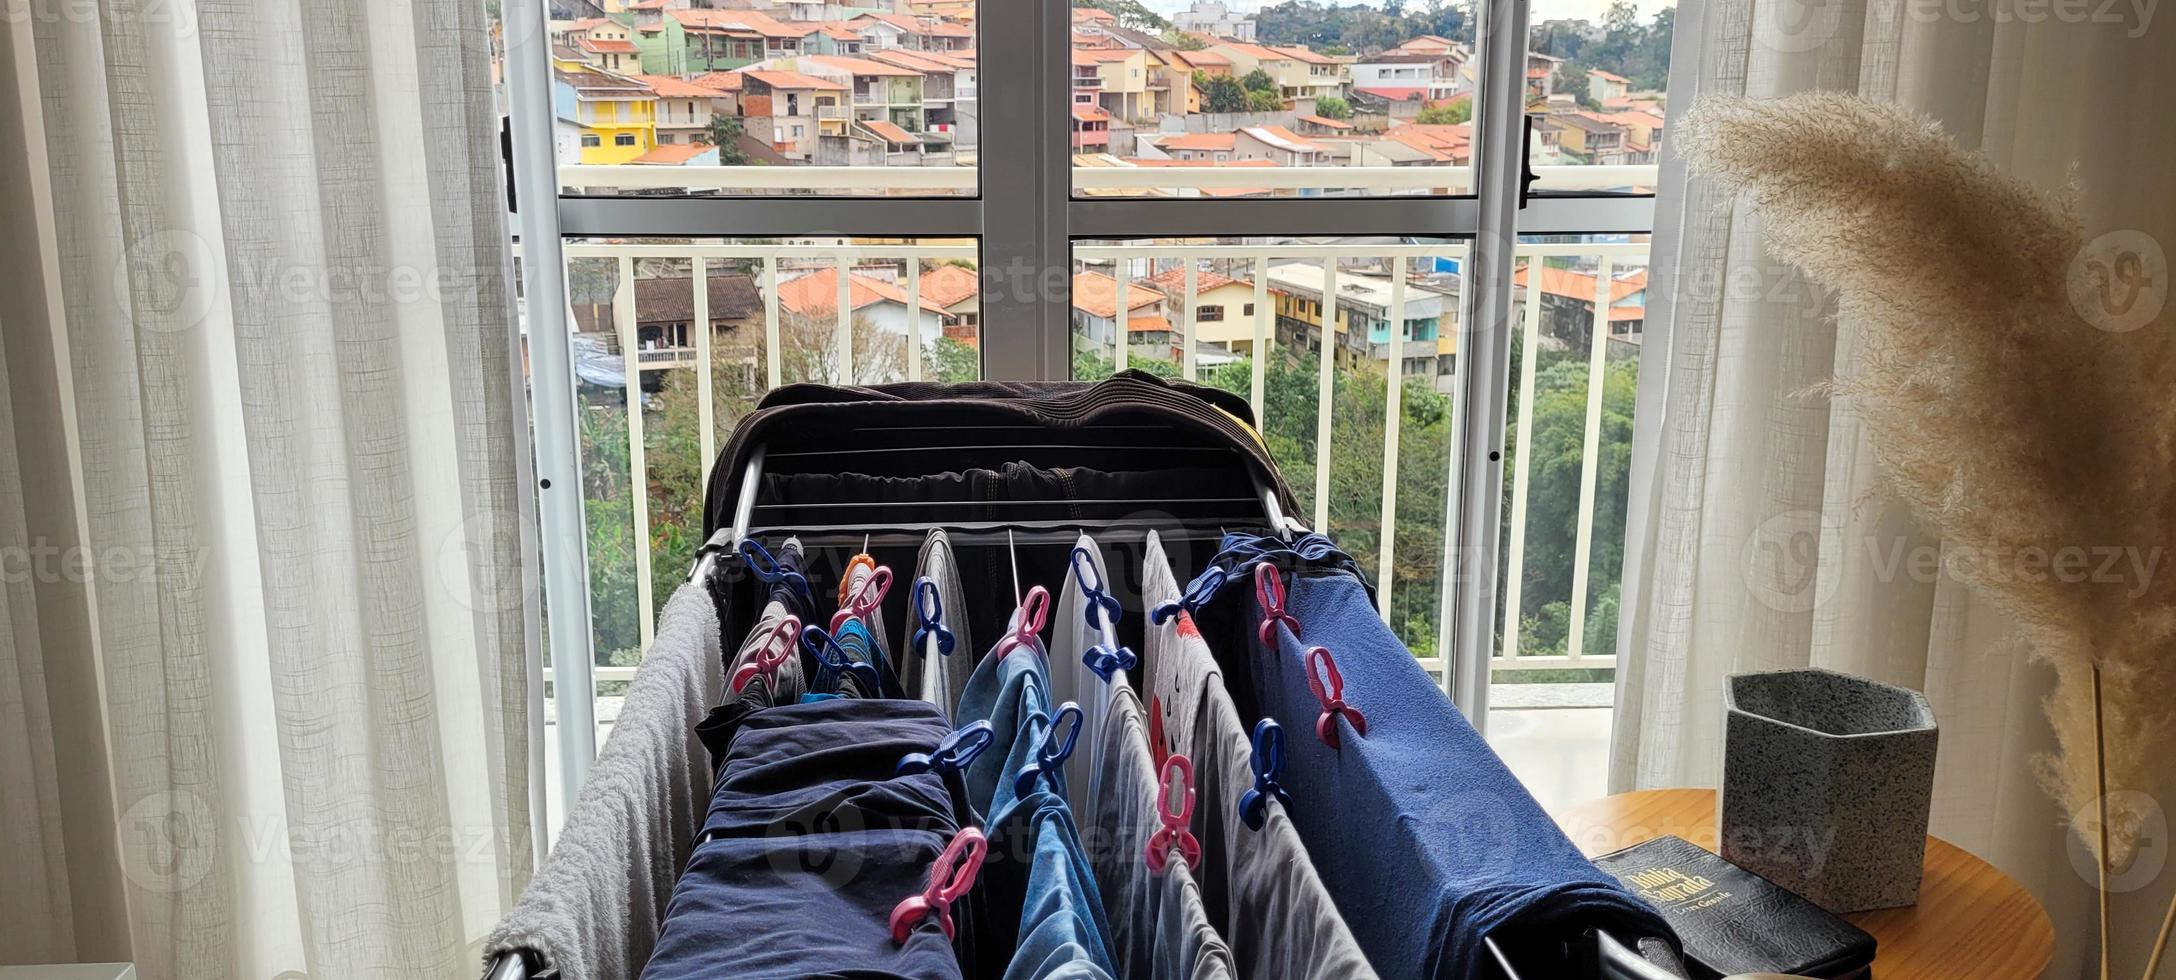 washed clothes hanging on clothesline in apartment photo